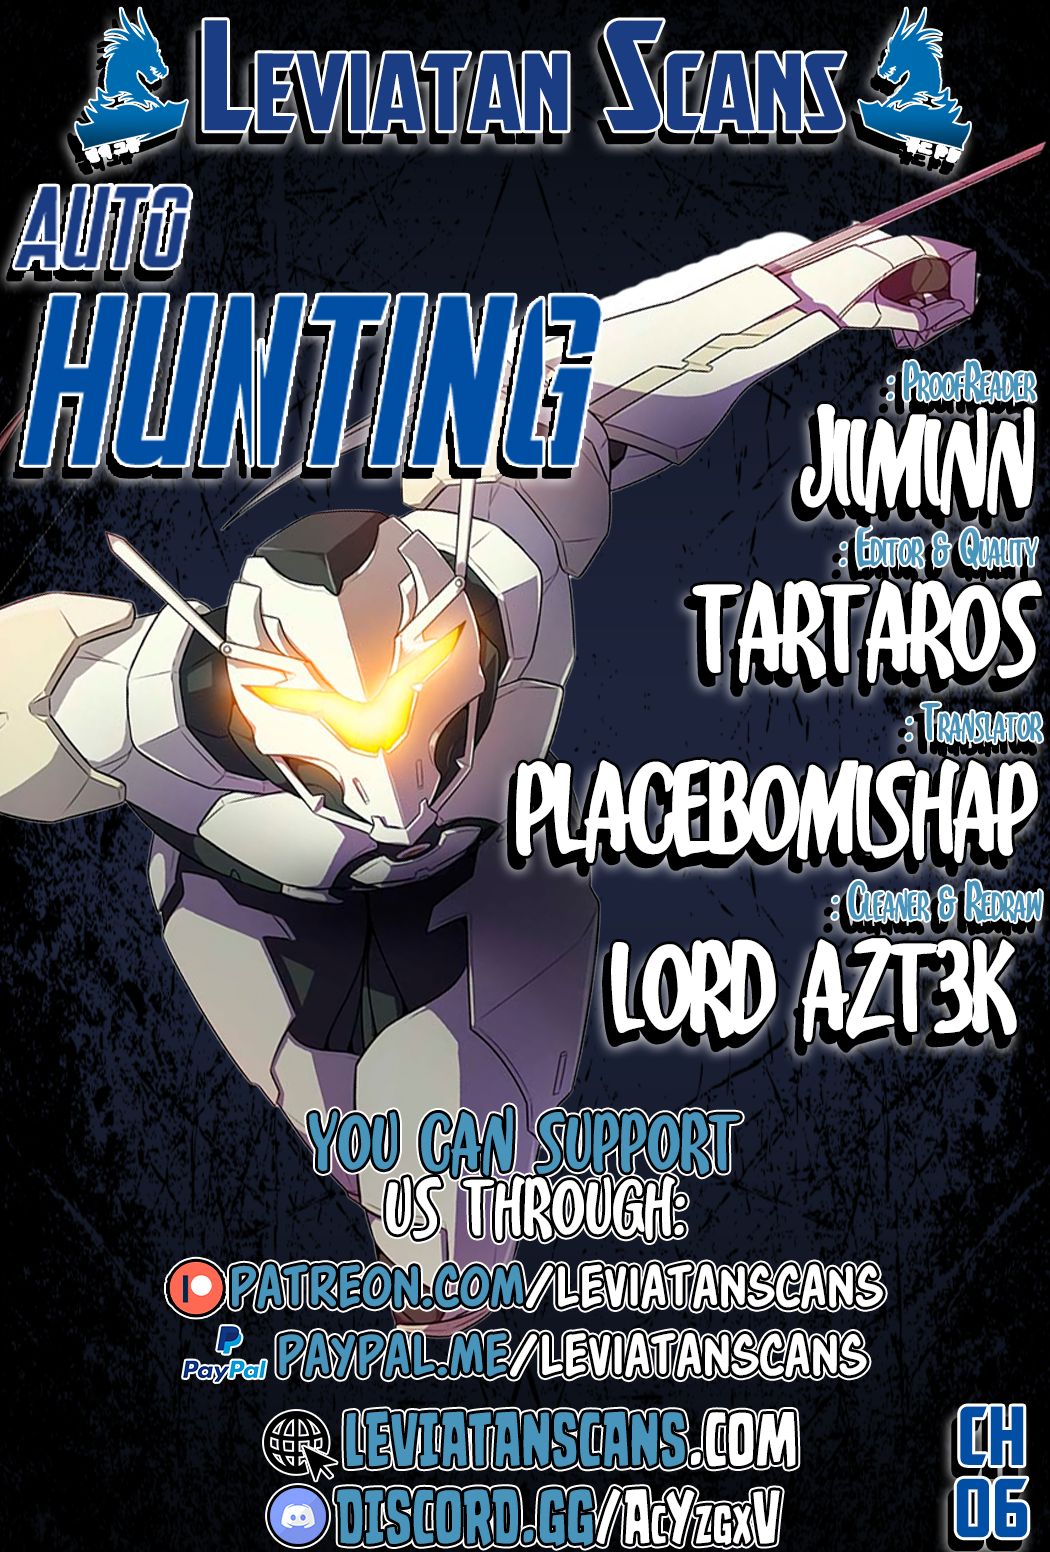 Auto Hunting Chapter 6